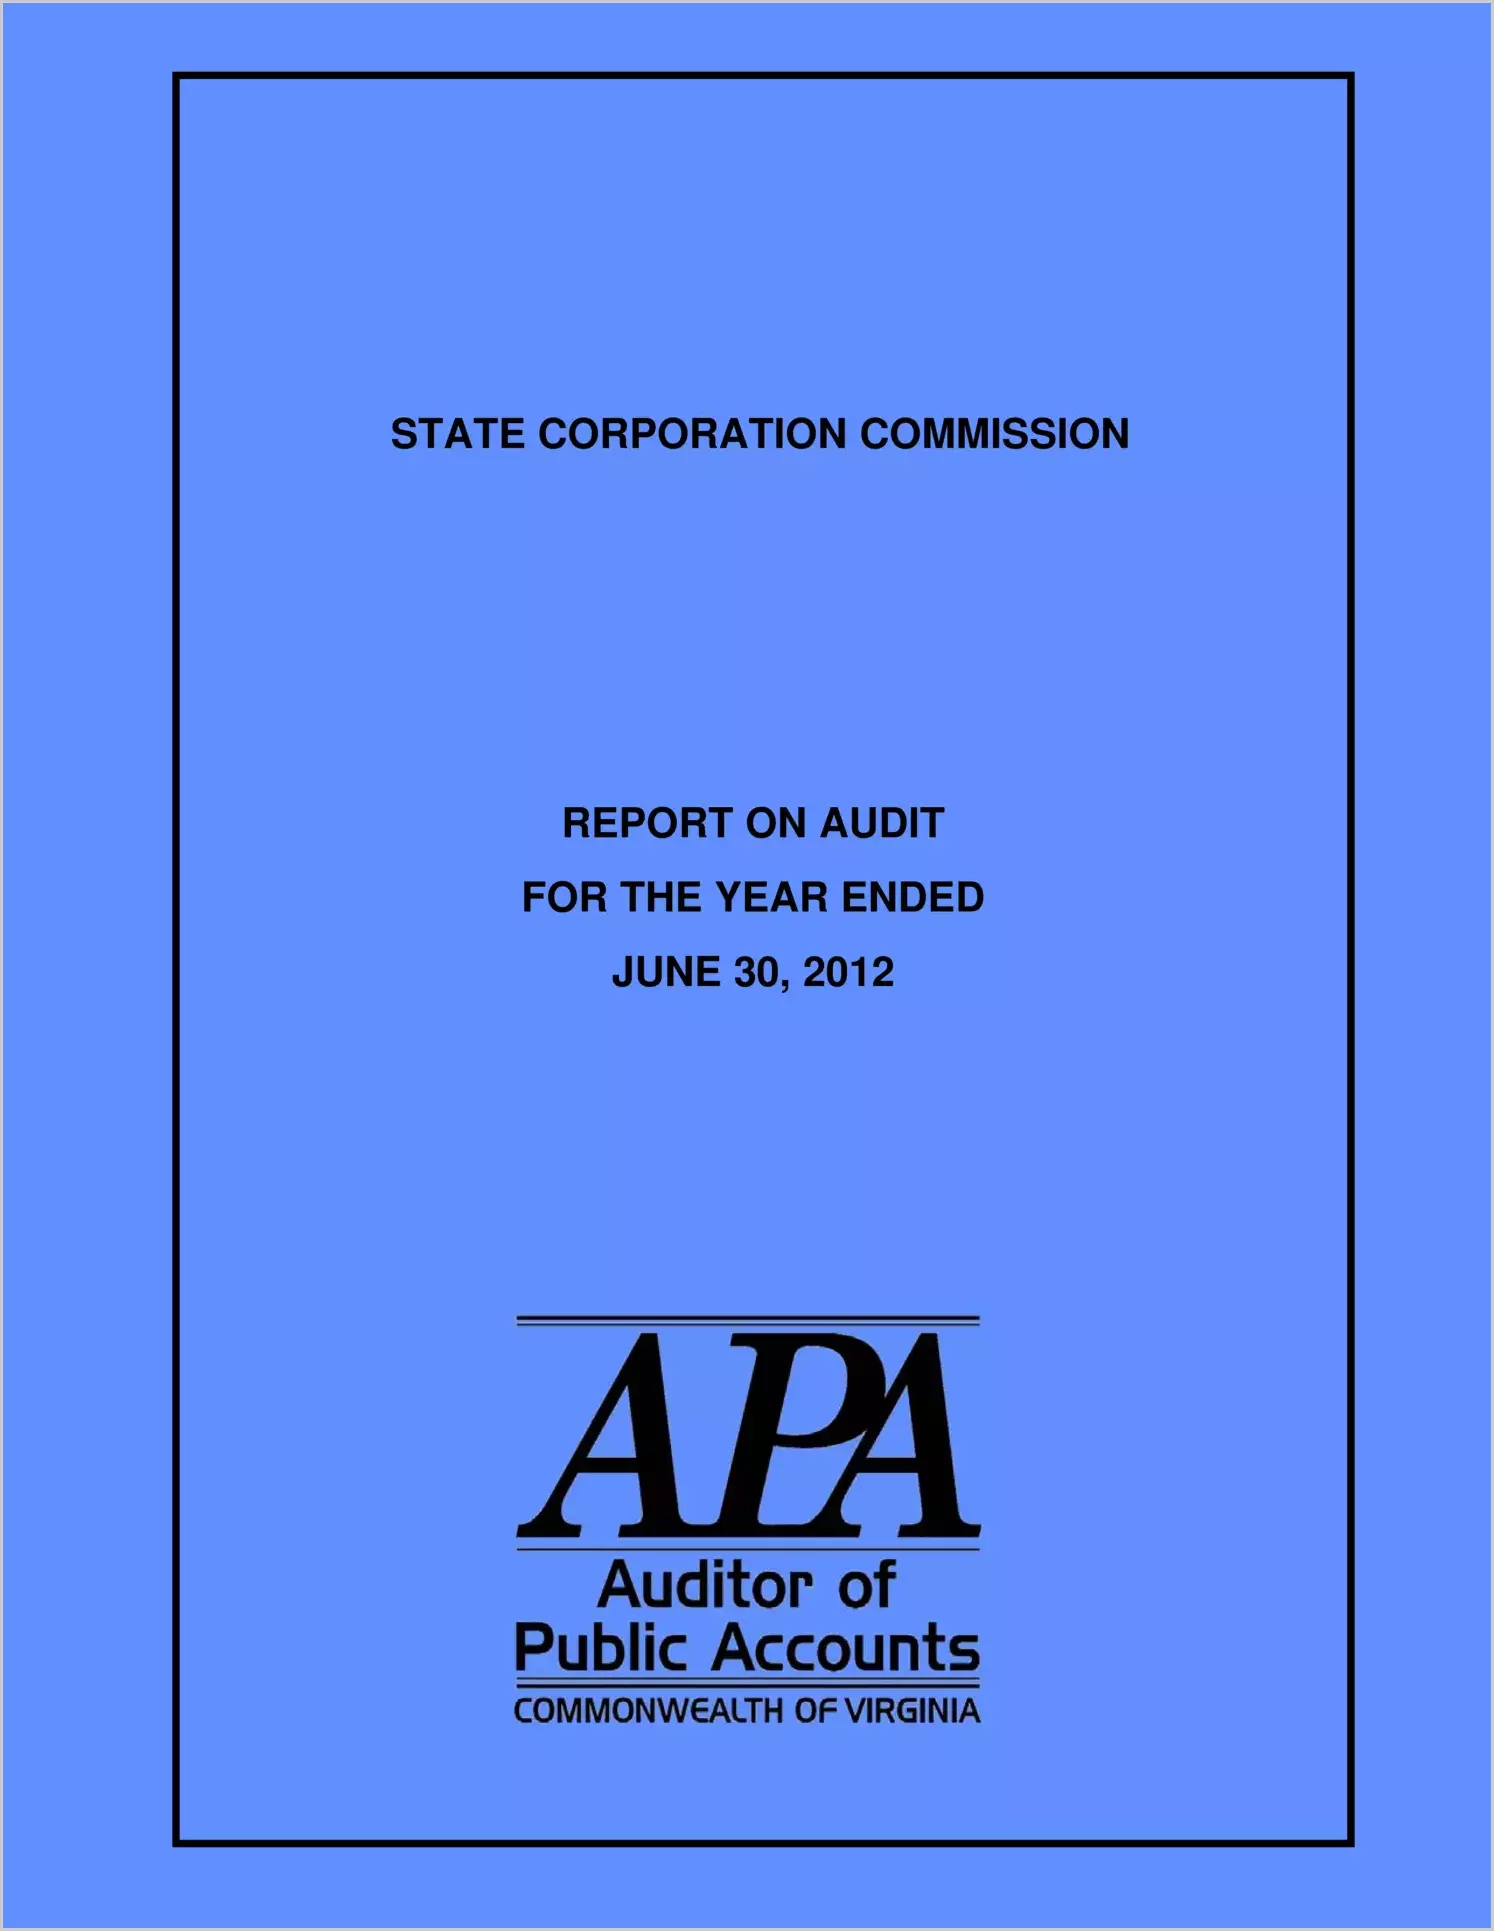 State Corporation Commission for the fiscal year ended June 30, 2012